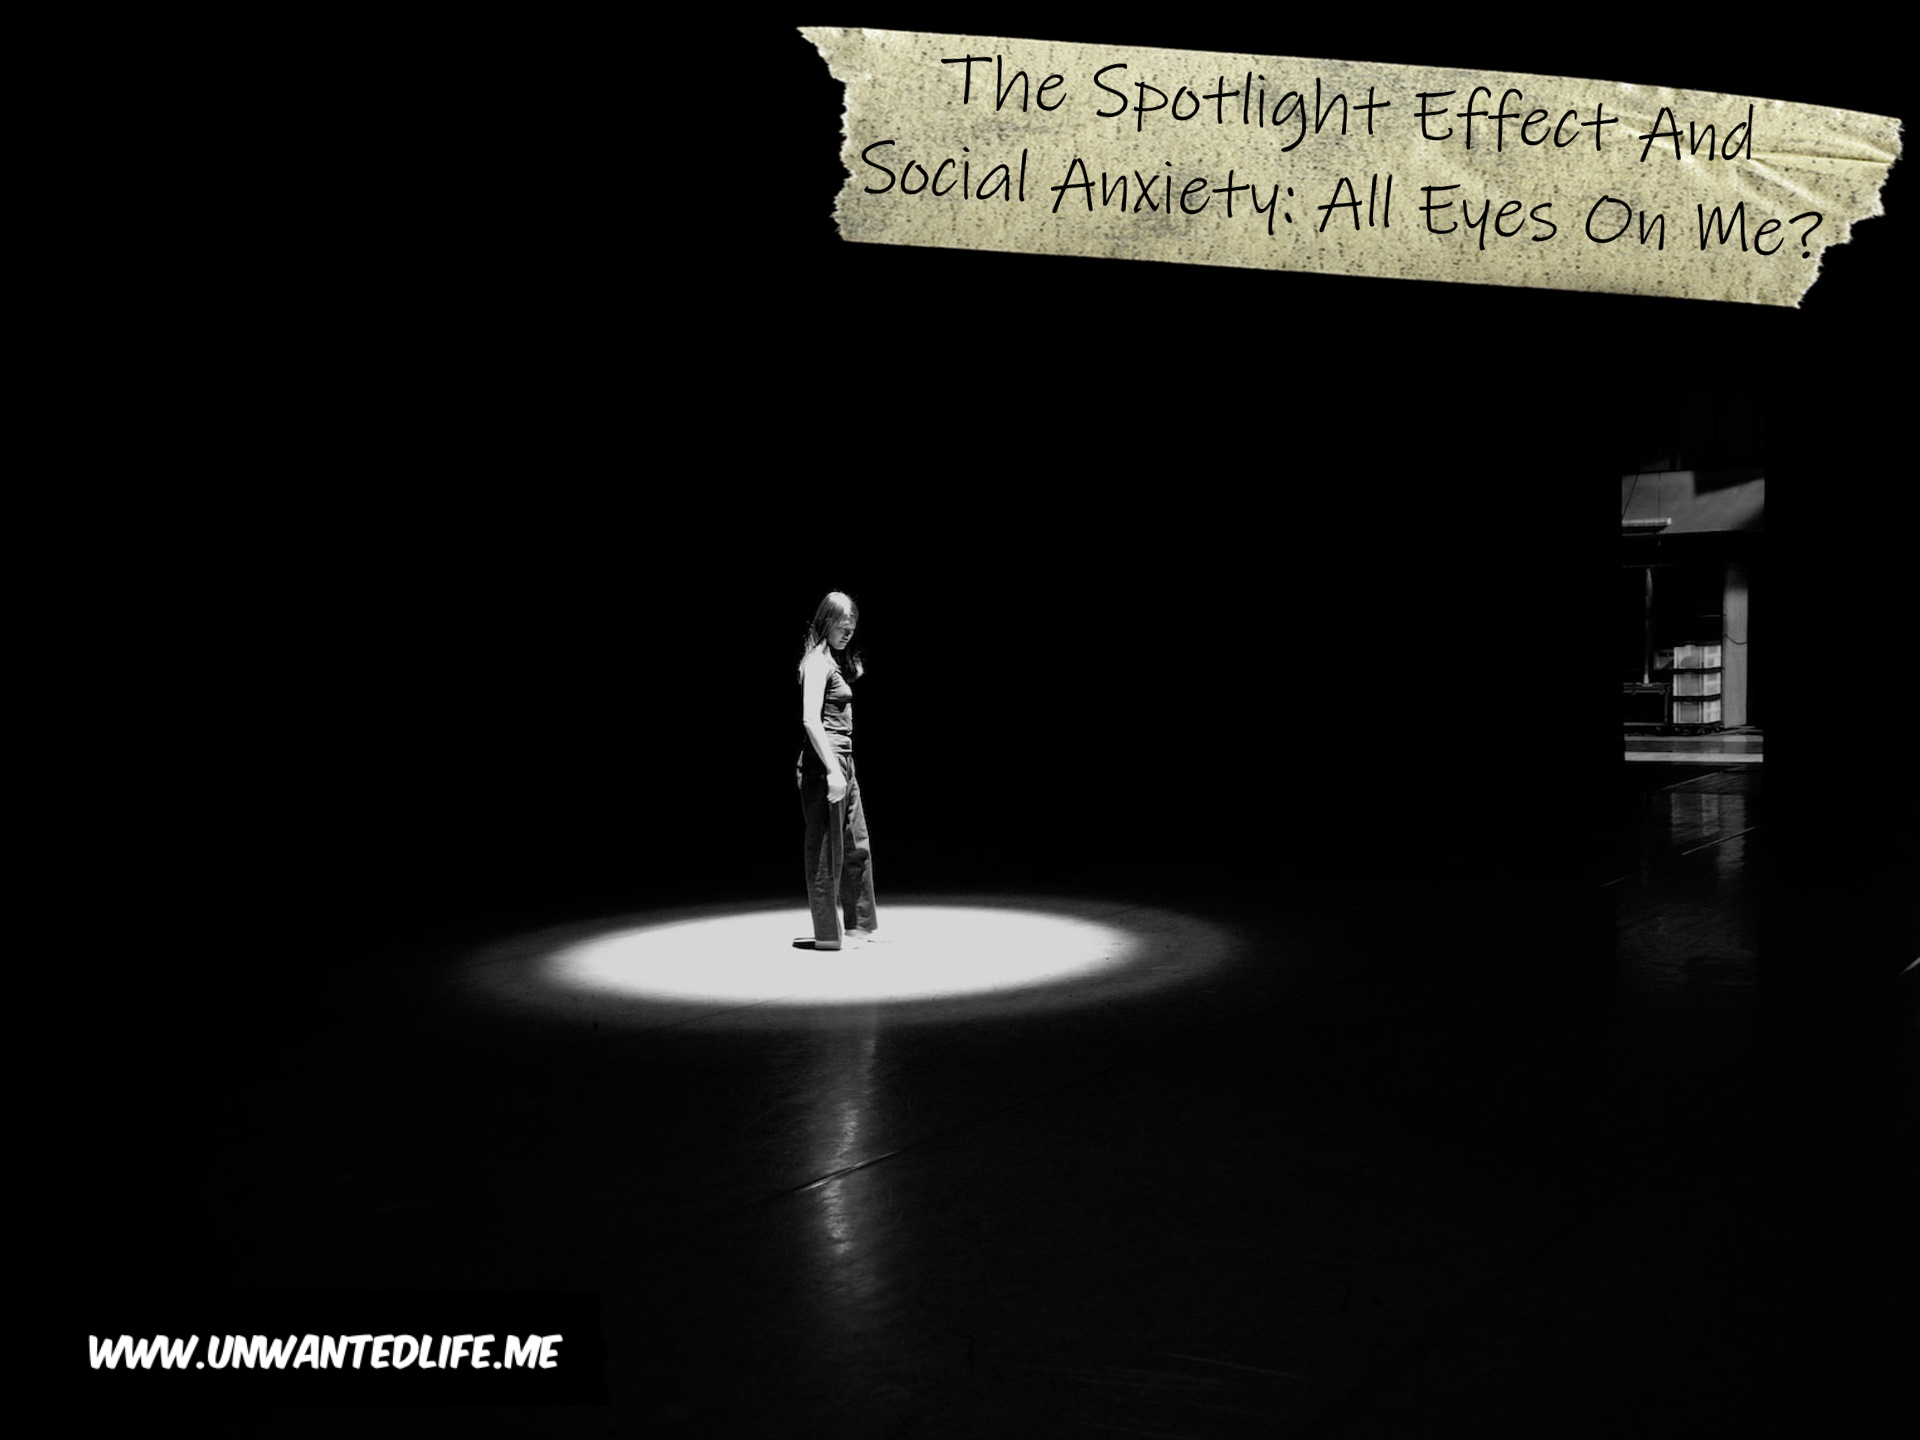 A black-and-white photo of a woman standing alone in a dark room, illuminated by a spotlight to represent the topic of the article - The Spotlight Effect And Social Anxiety: All Eyes On Me?